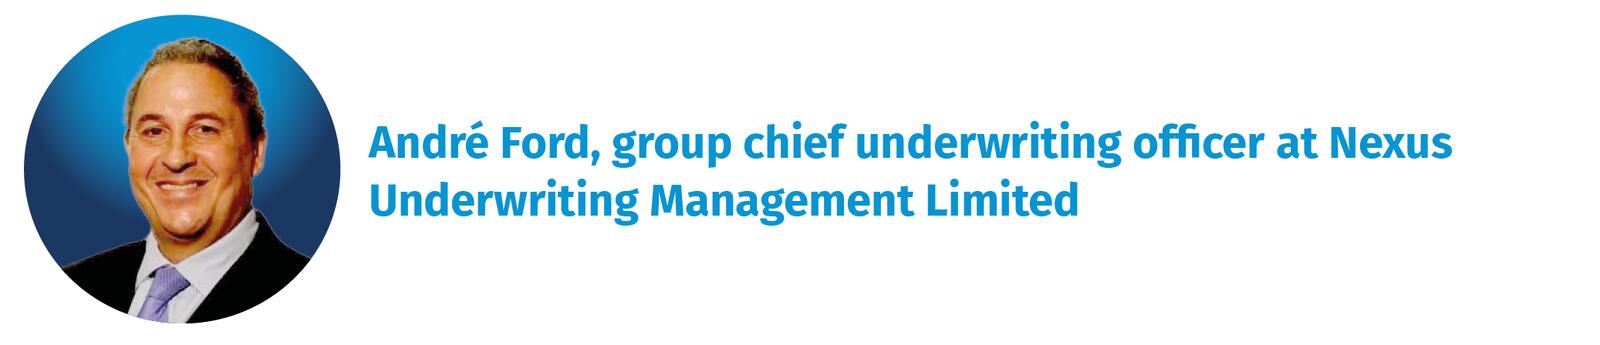 André-Ford,-group-chief-underwriting-officer-at-Nexus-Underwriting-Management-Limited